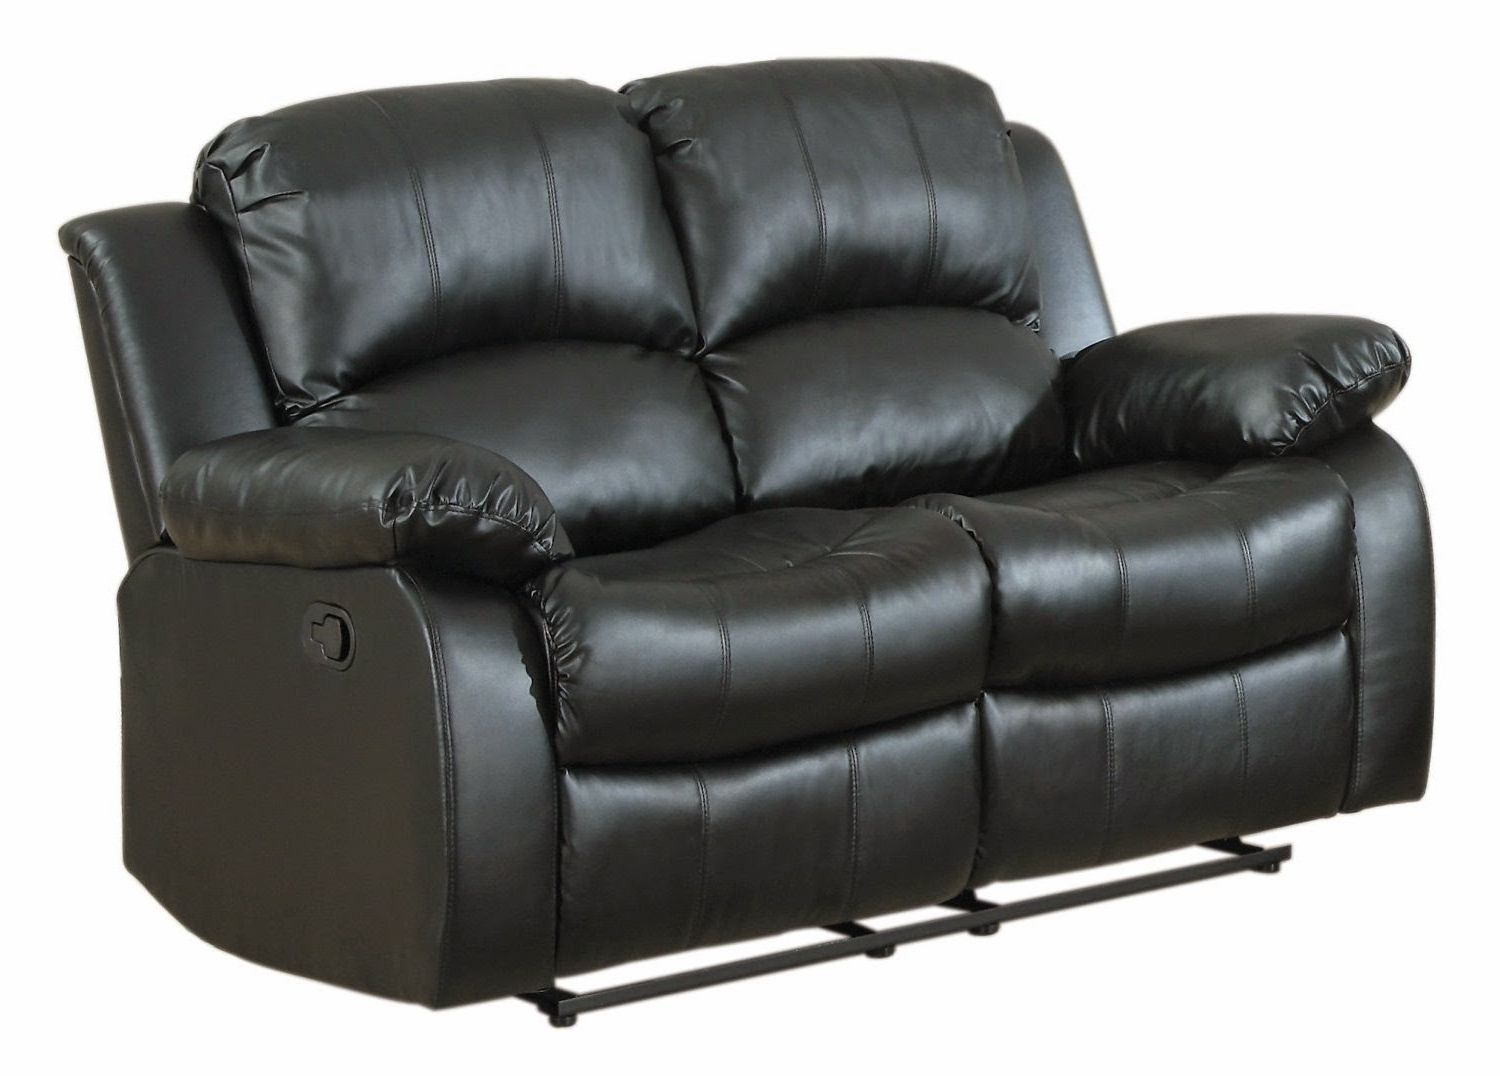 Reclining Sofas For Sale: Berkline Leather Reclining Sofa Costco With Well Known Berkline Sofas (Photo 10 of 15)